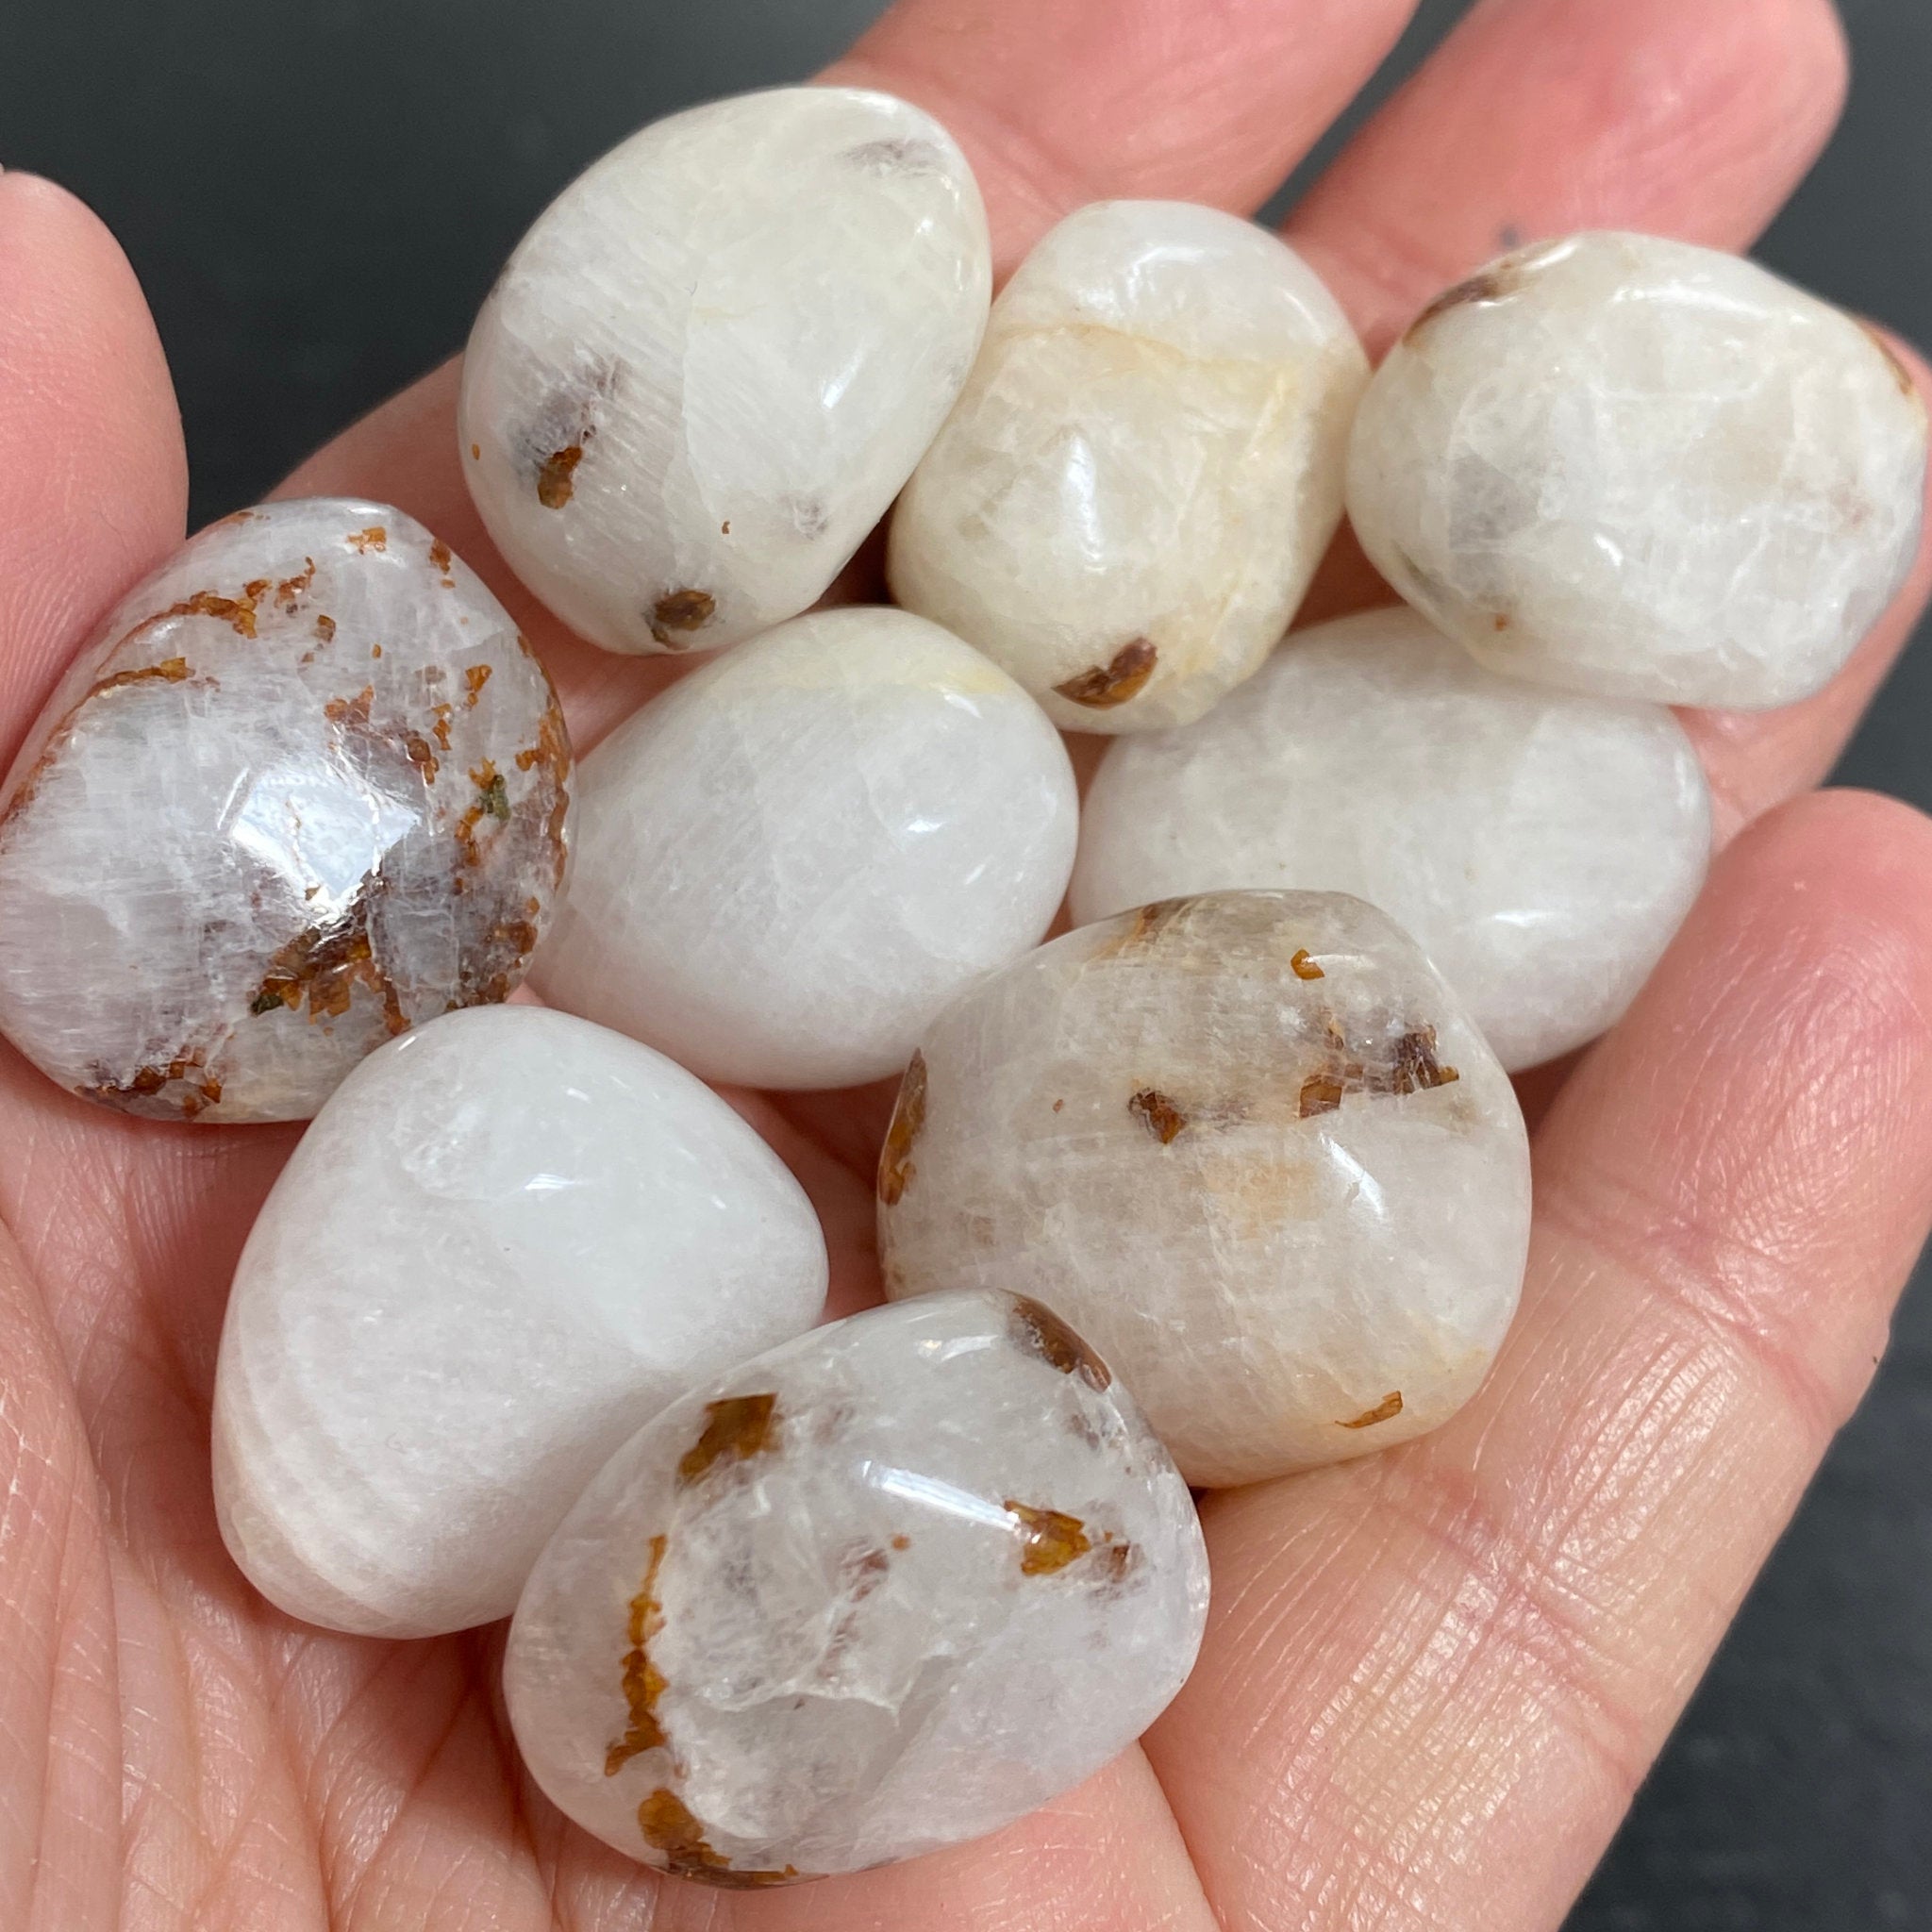 Rare Cryolite tumbled stones from Greenland